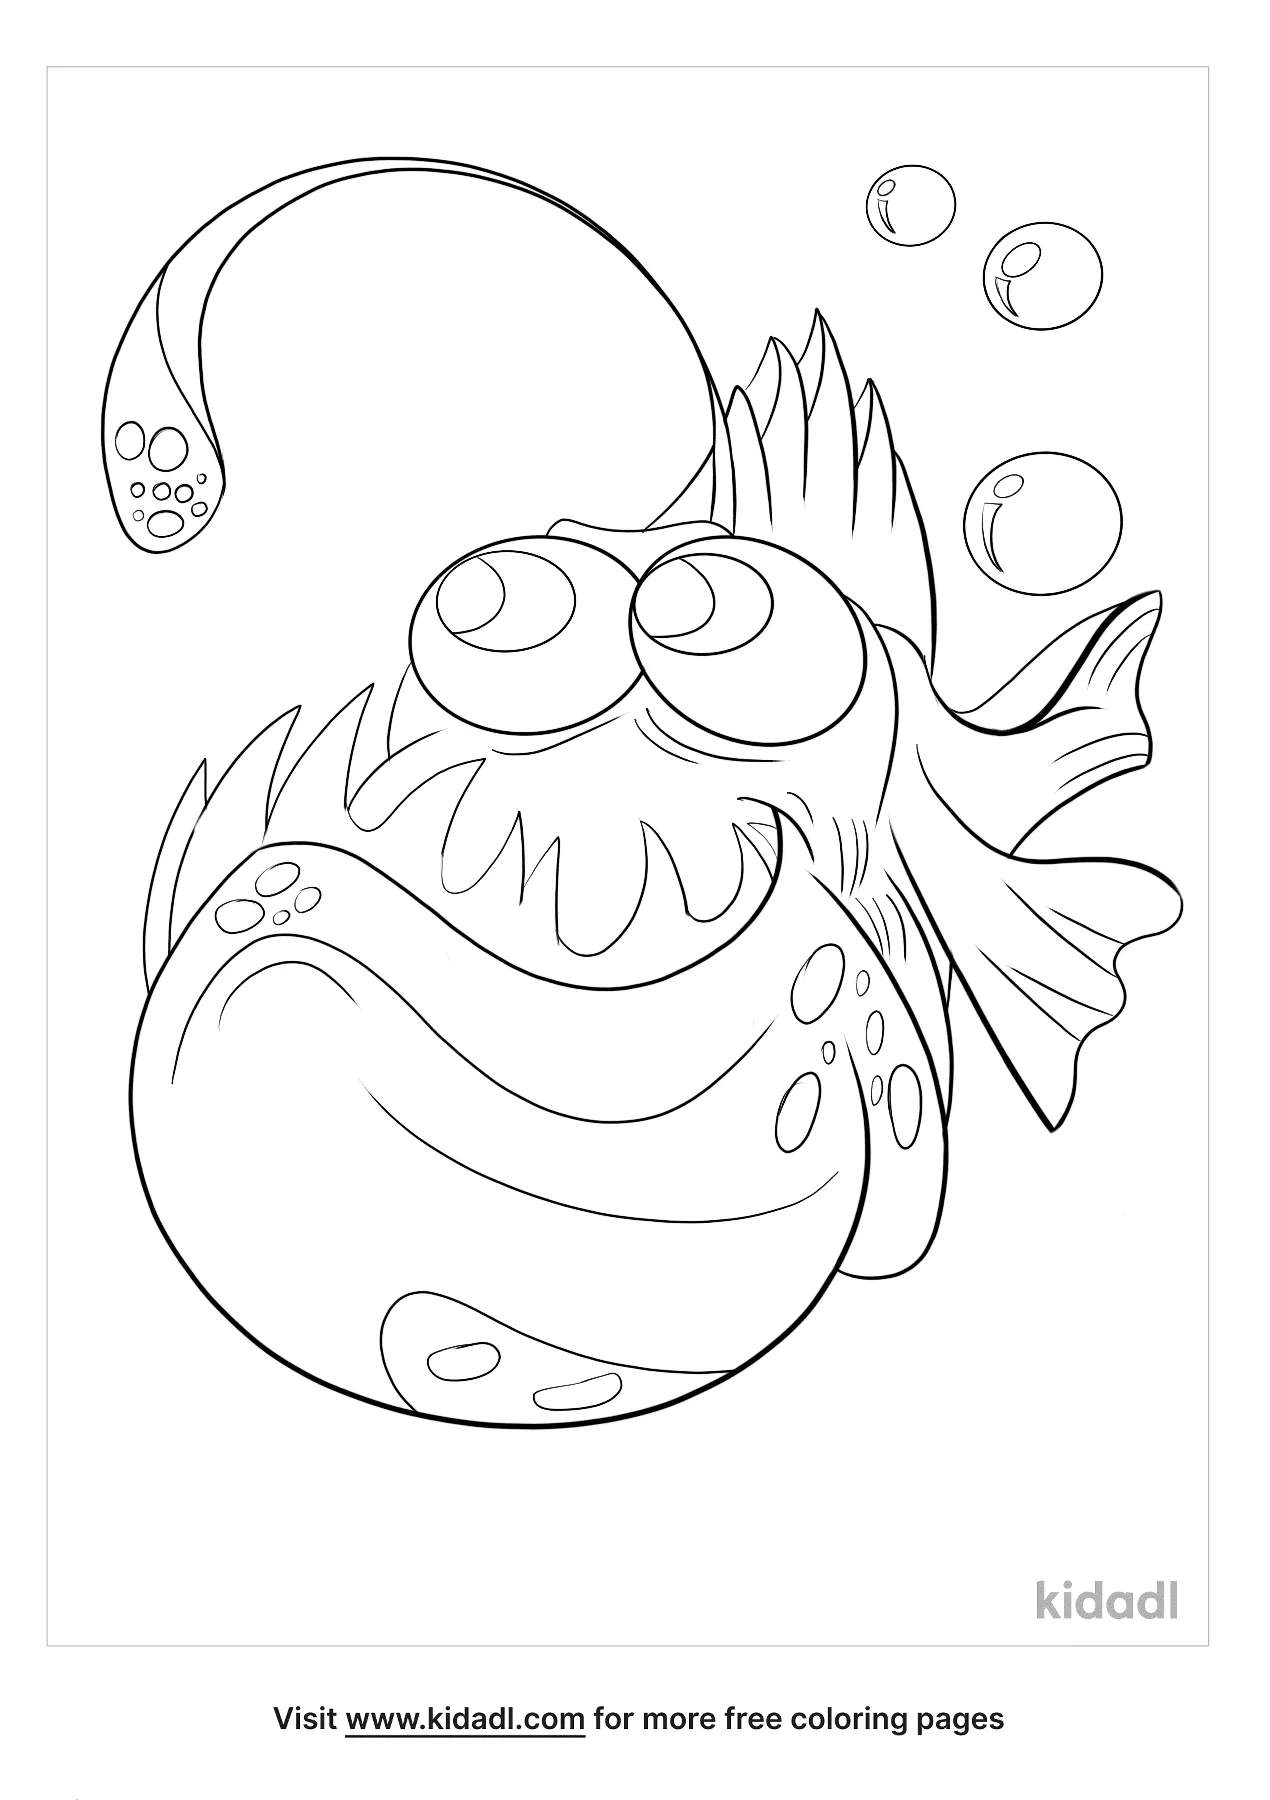 Angler Fish Coloring Pages Free Fish Coloring Pages Kidadl